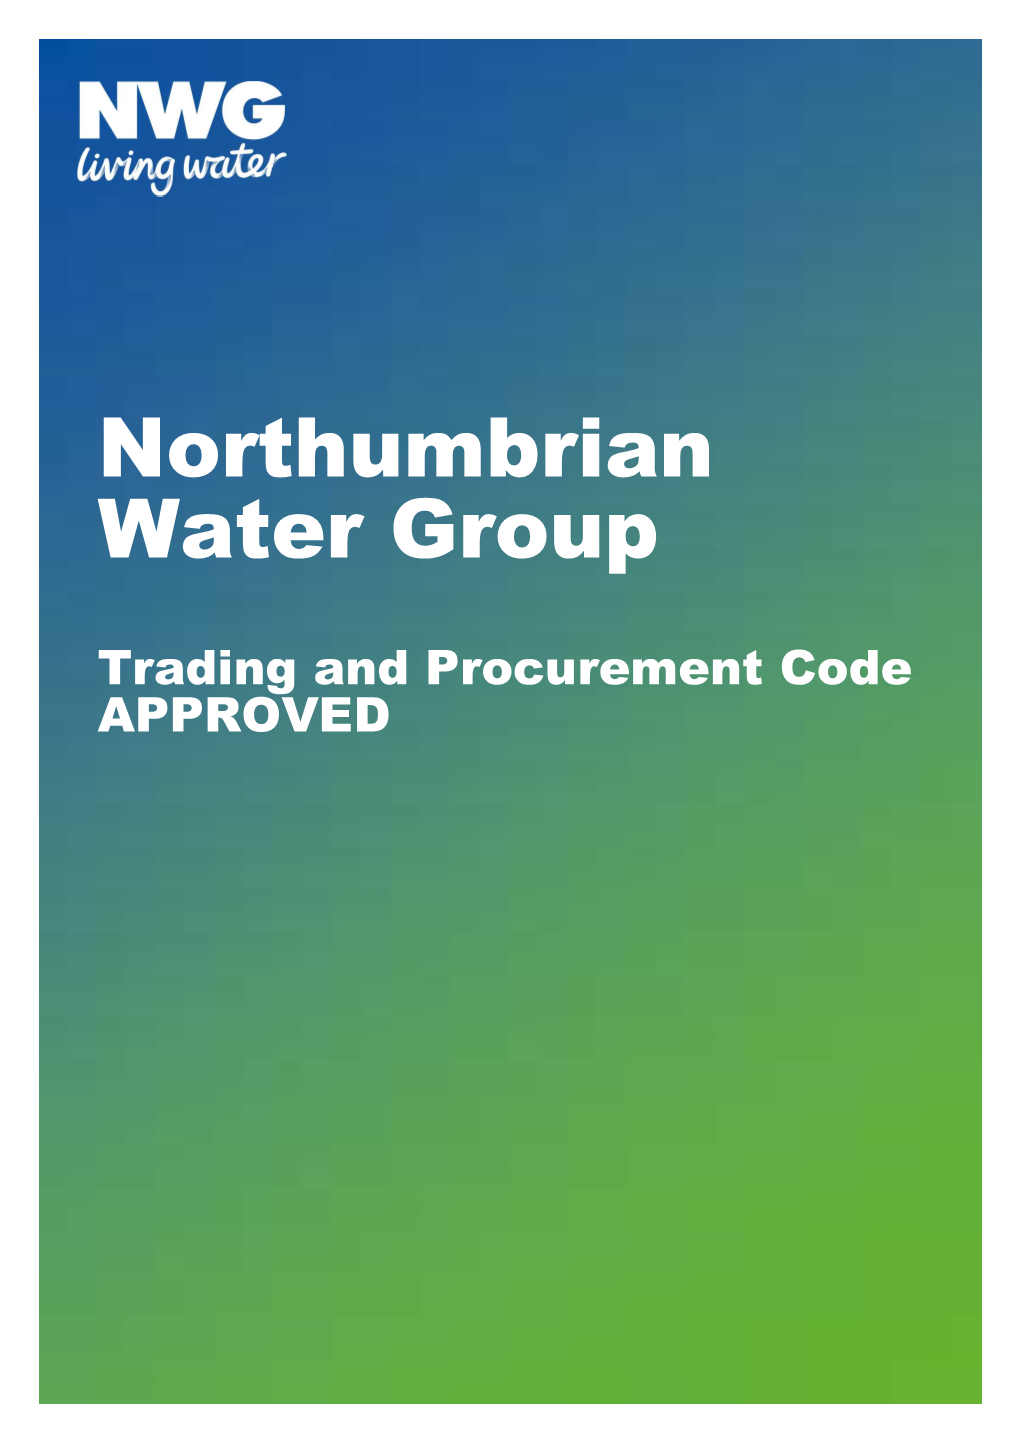 Northumbrian Water Group (NWG)